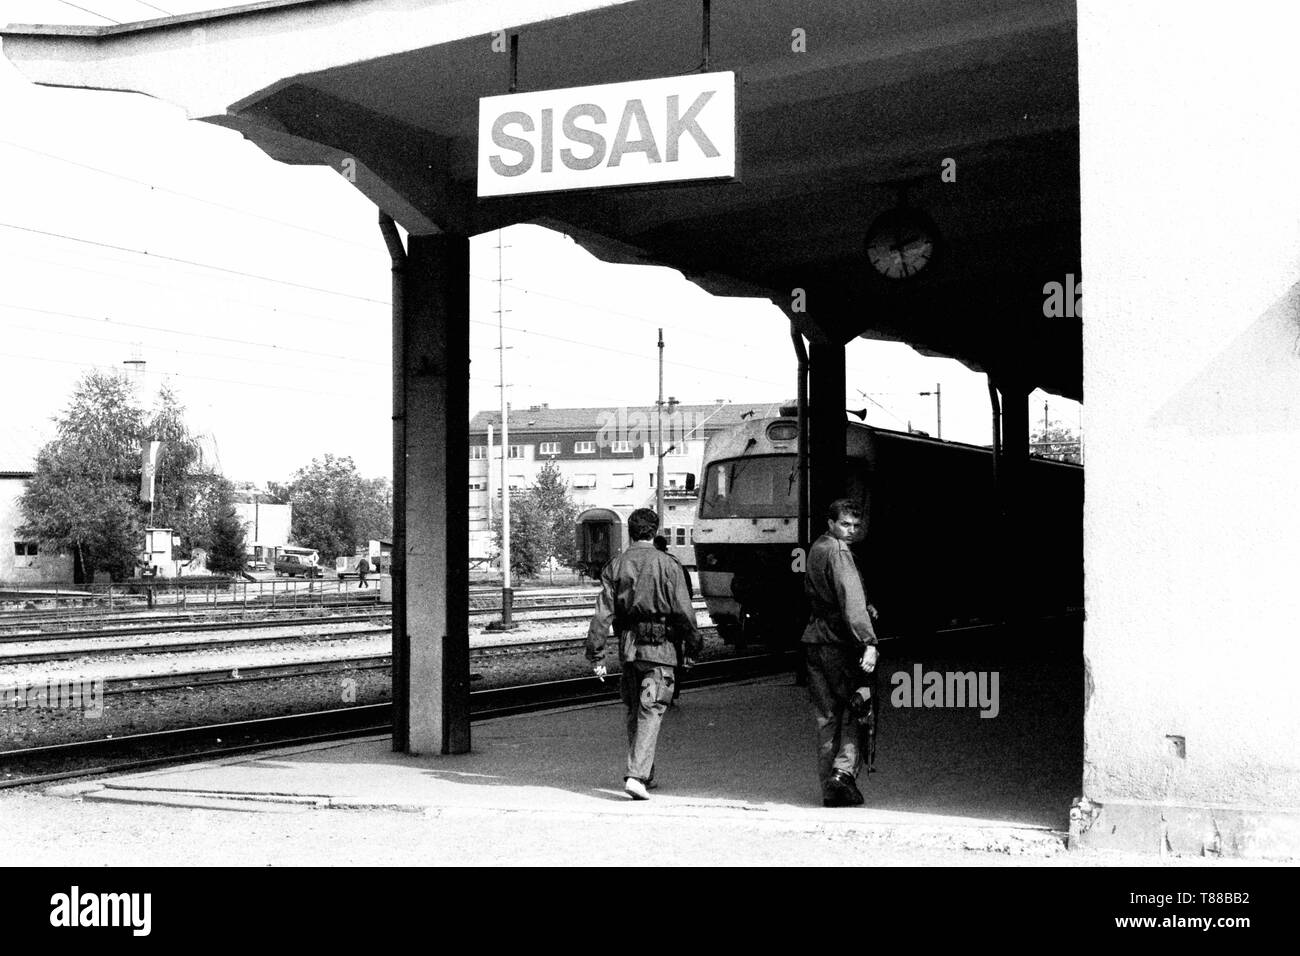 Two soldiers from the Croatian Defense Forces patrol Sisak train station during the Yugoslav break-up in 1991. Picture by Adam Alexander Stock Photo